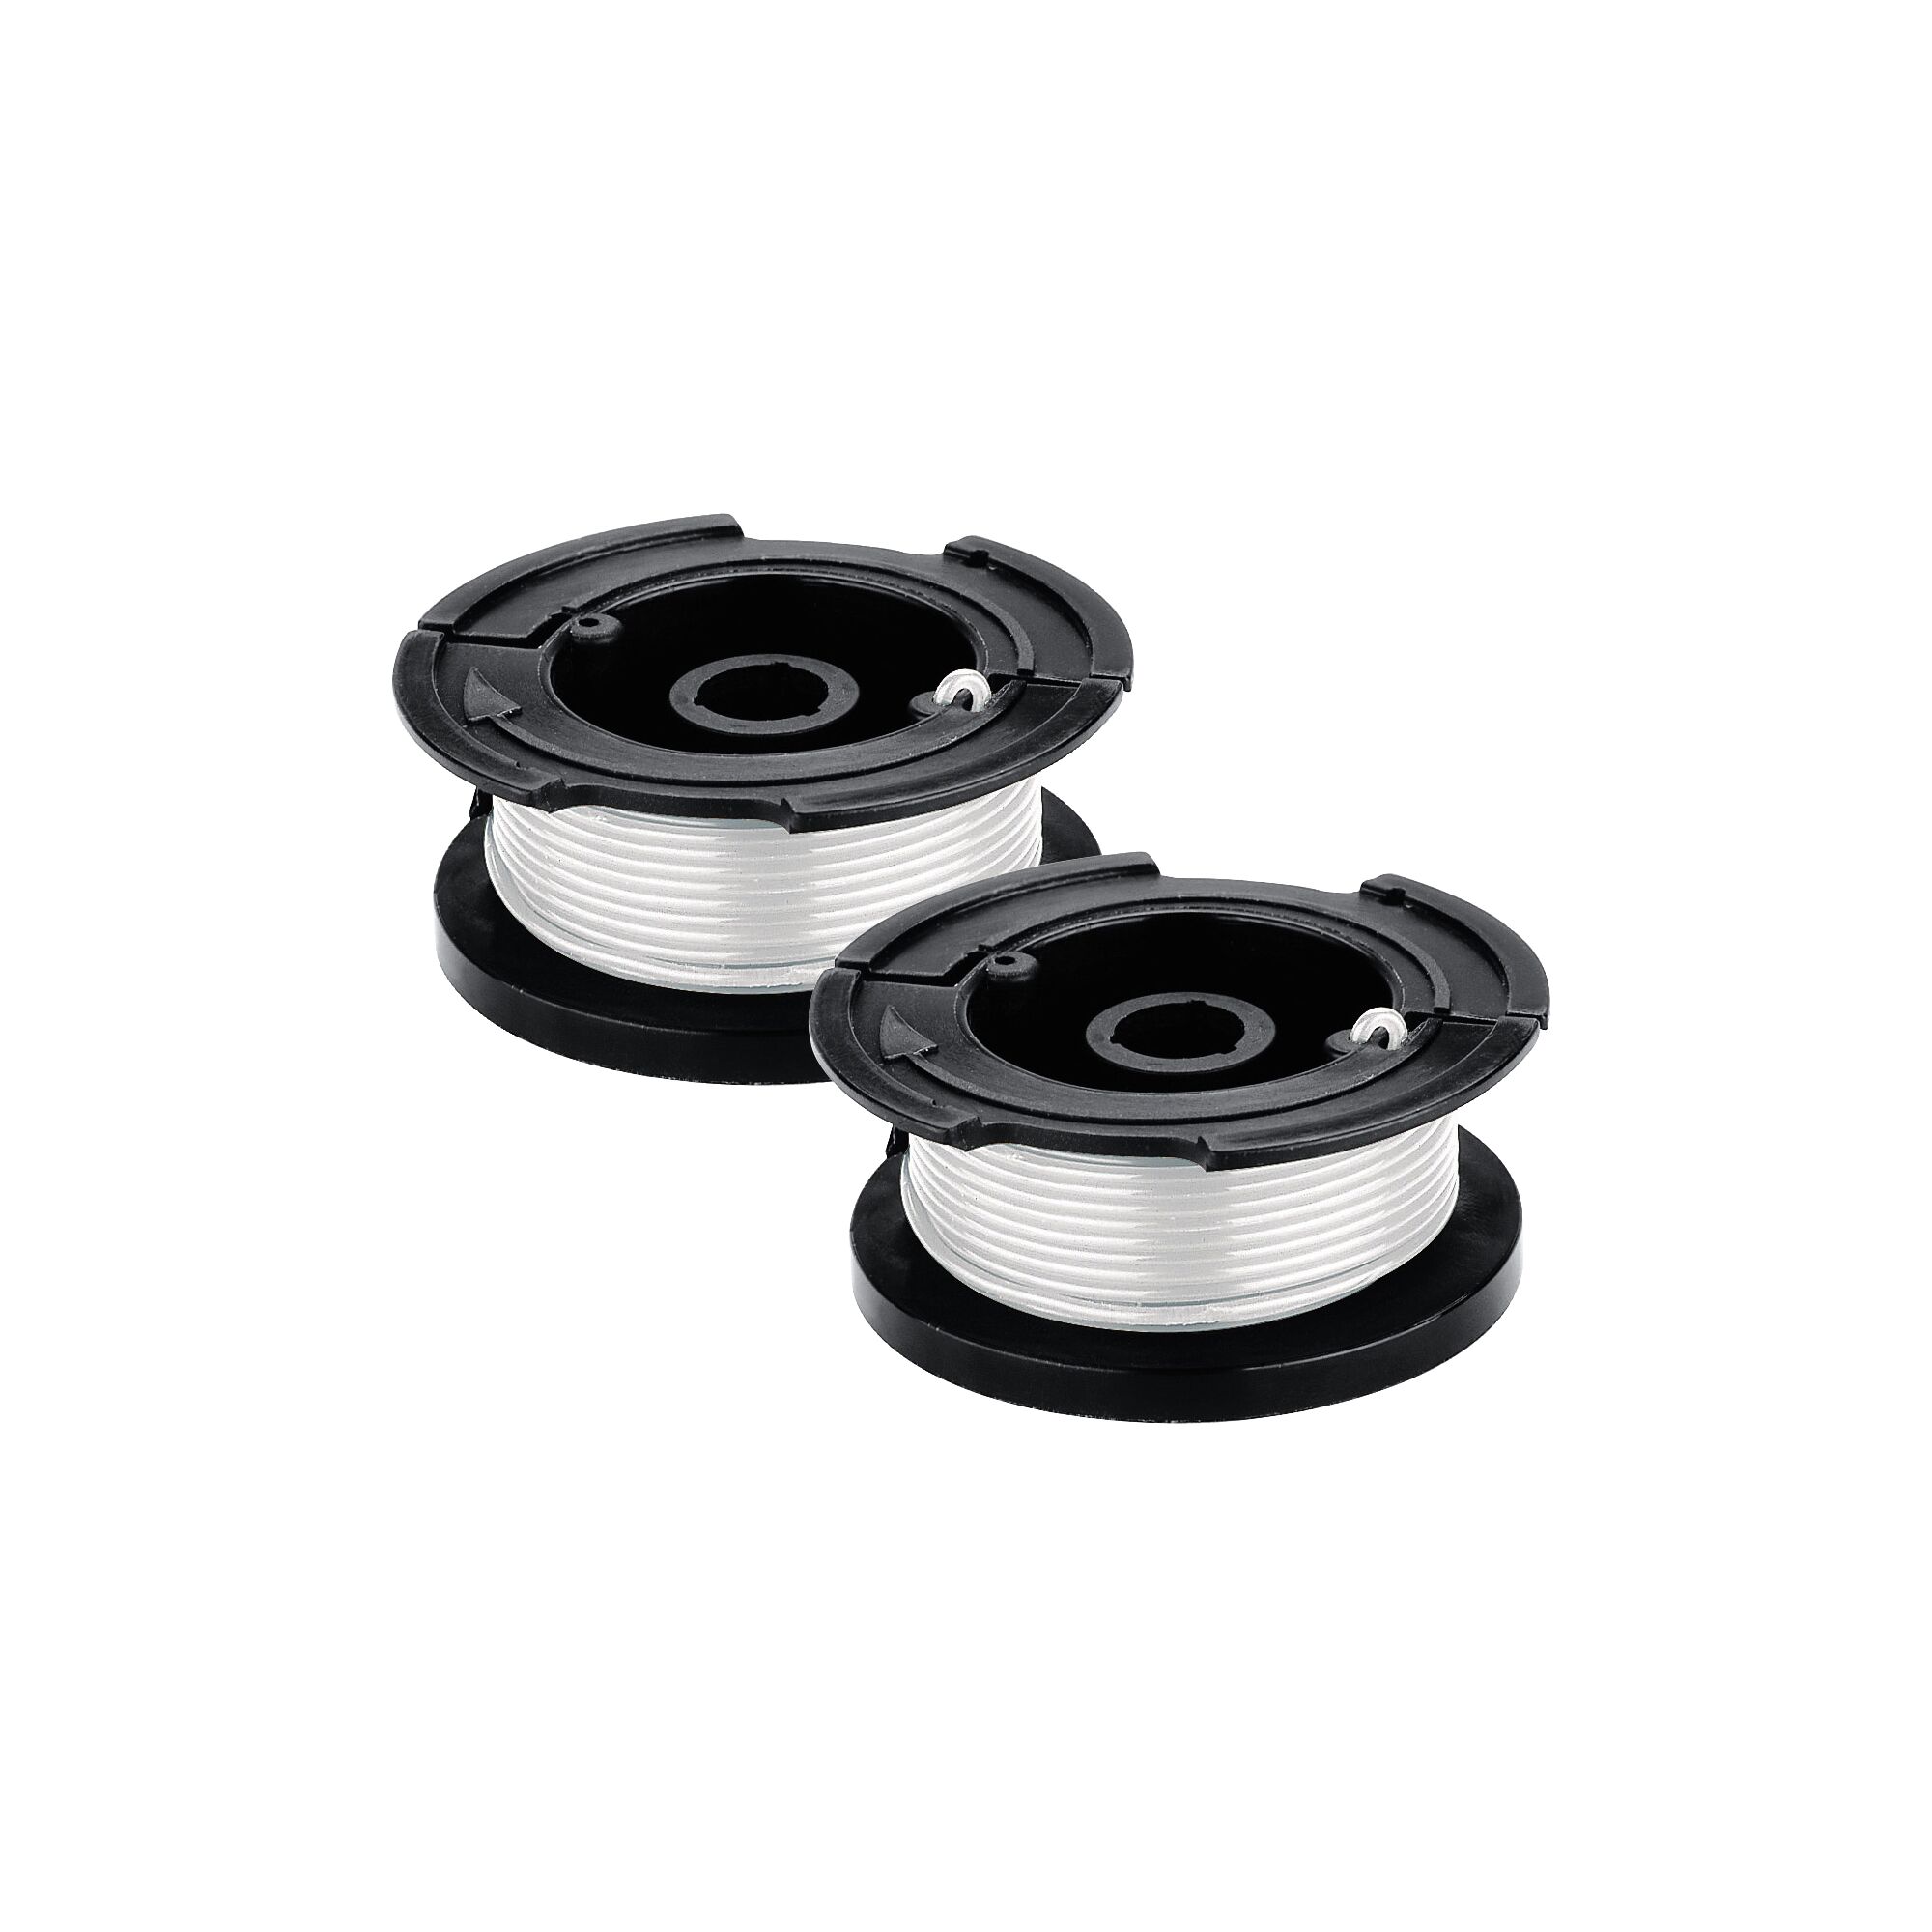 2 pack auto feed replacement spools.